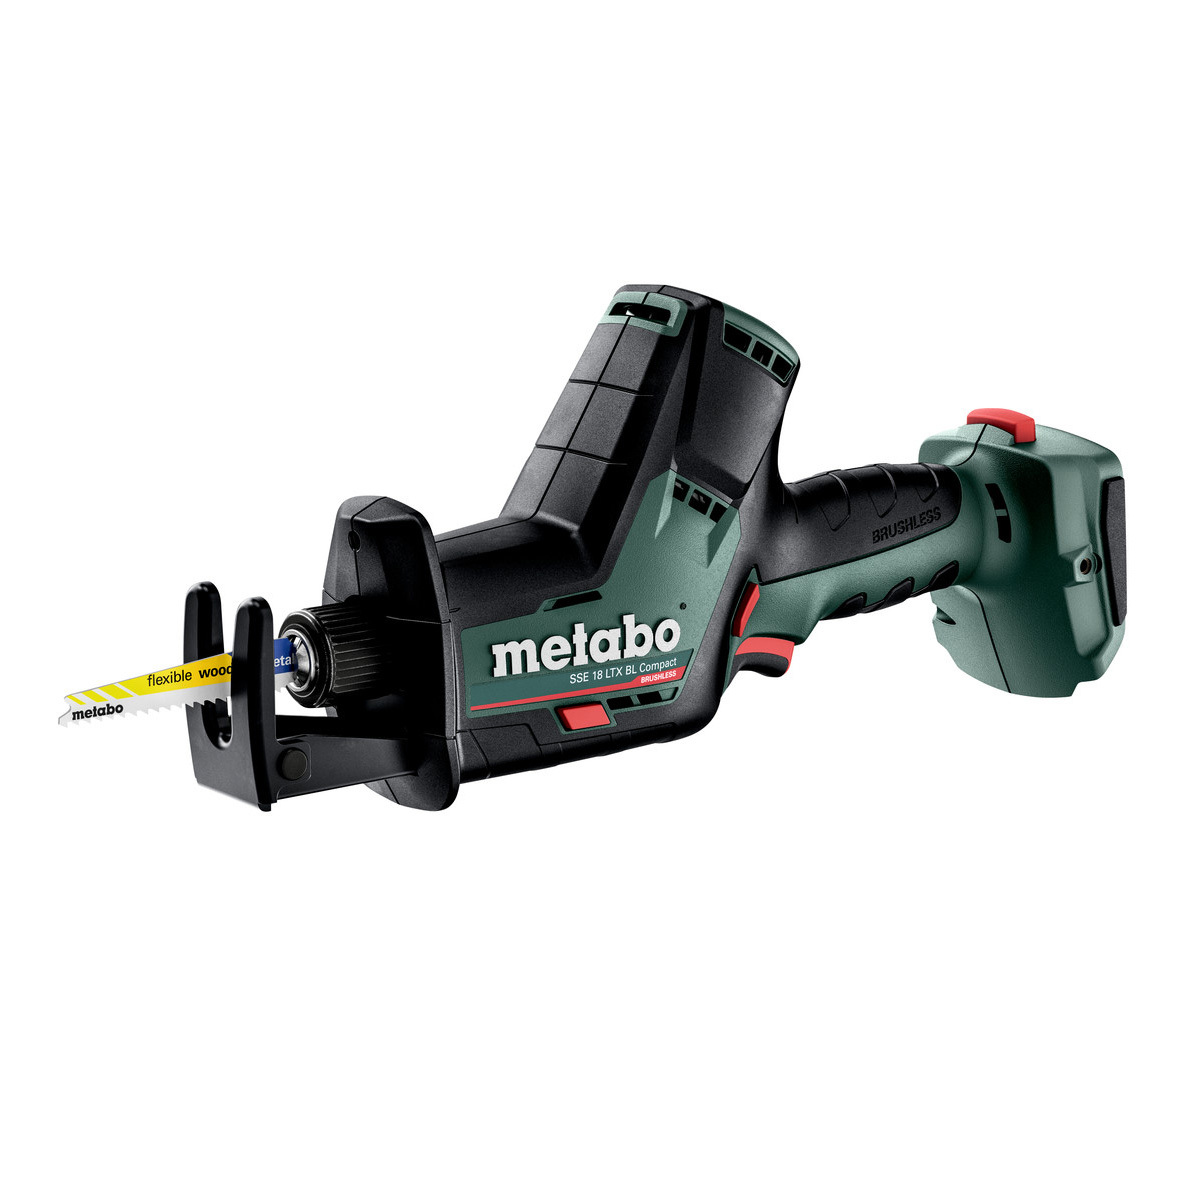 Metabo 18V Compact Reciprocating/Sabre Saw SSE 18 LTX BL (tool only) 602366850